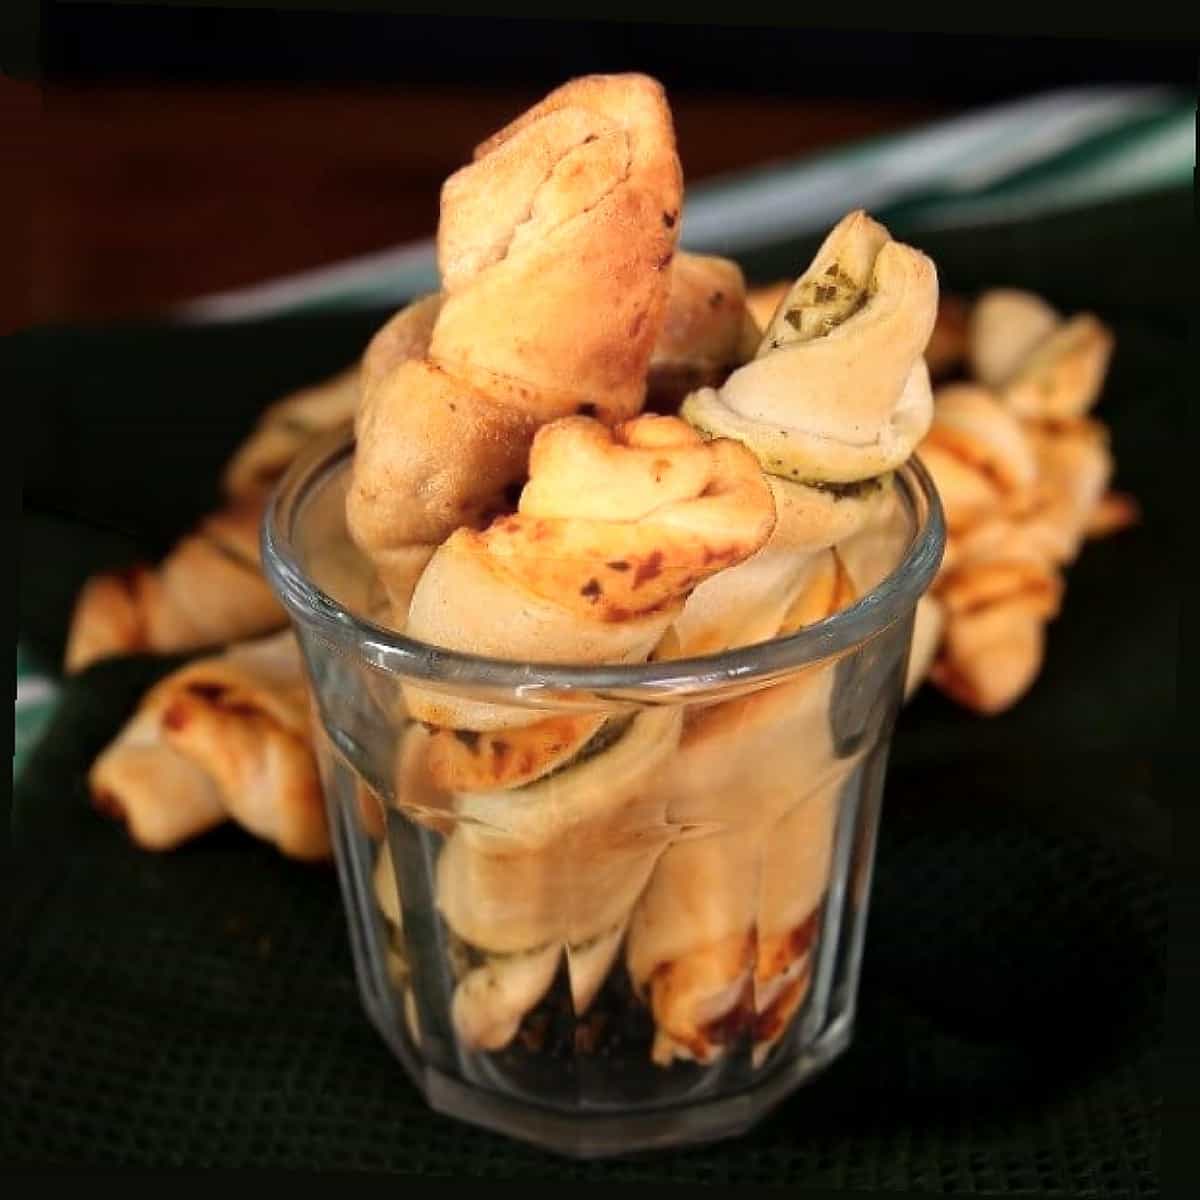 Rolled up crescent roll appetizers sticking out of a wide mouth glass.